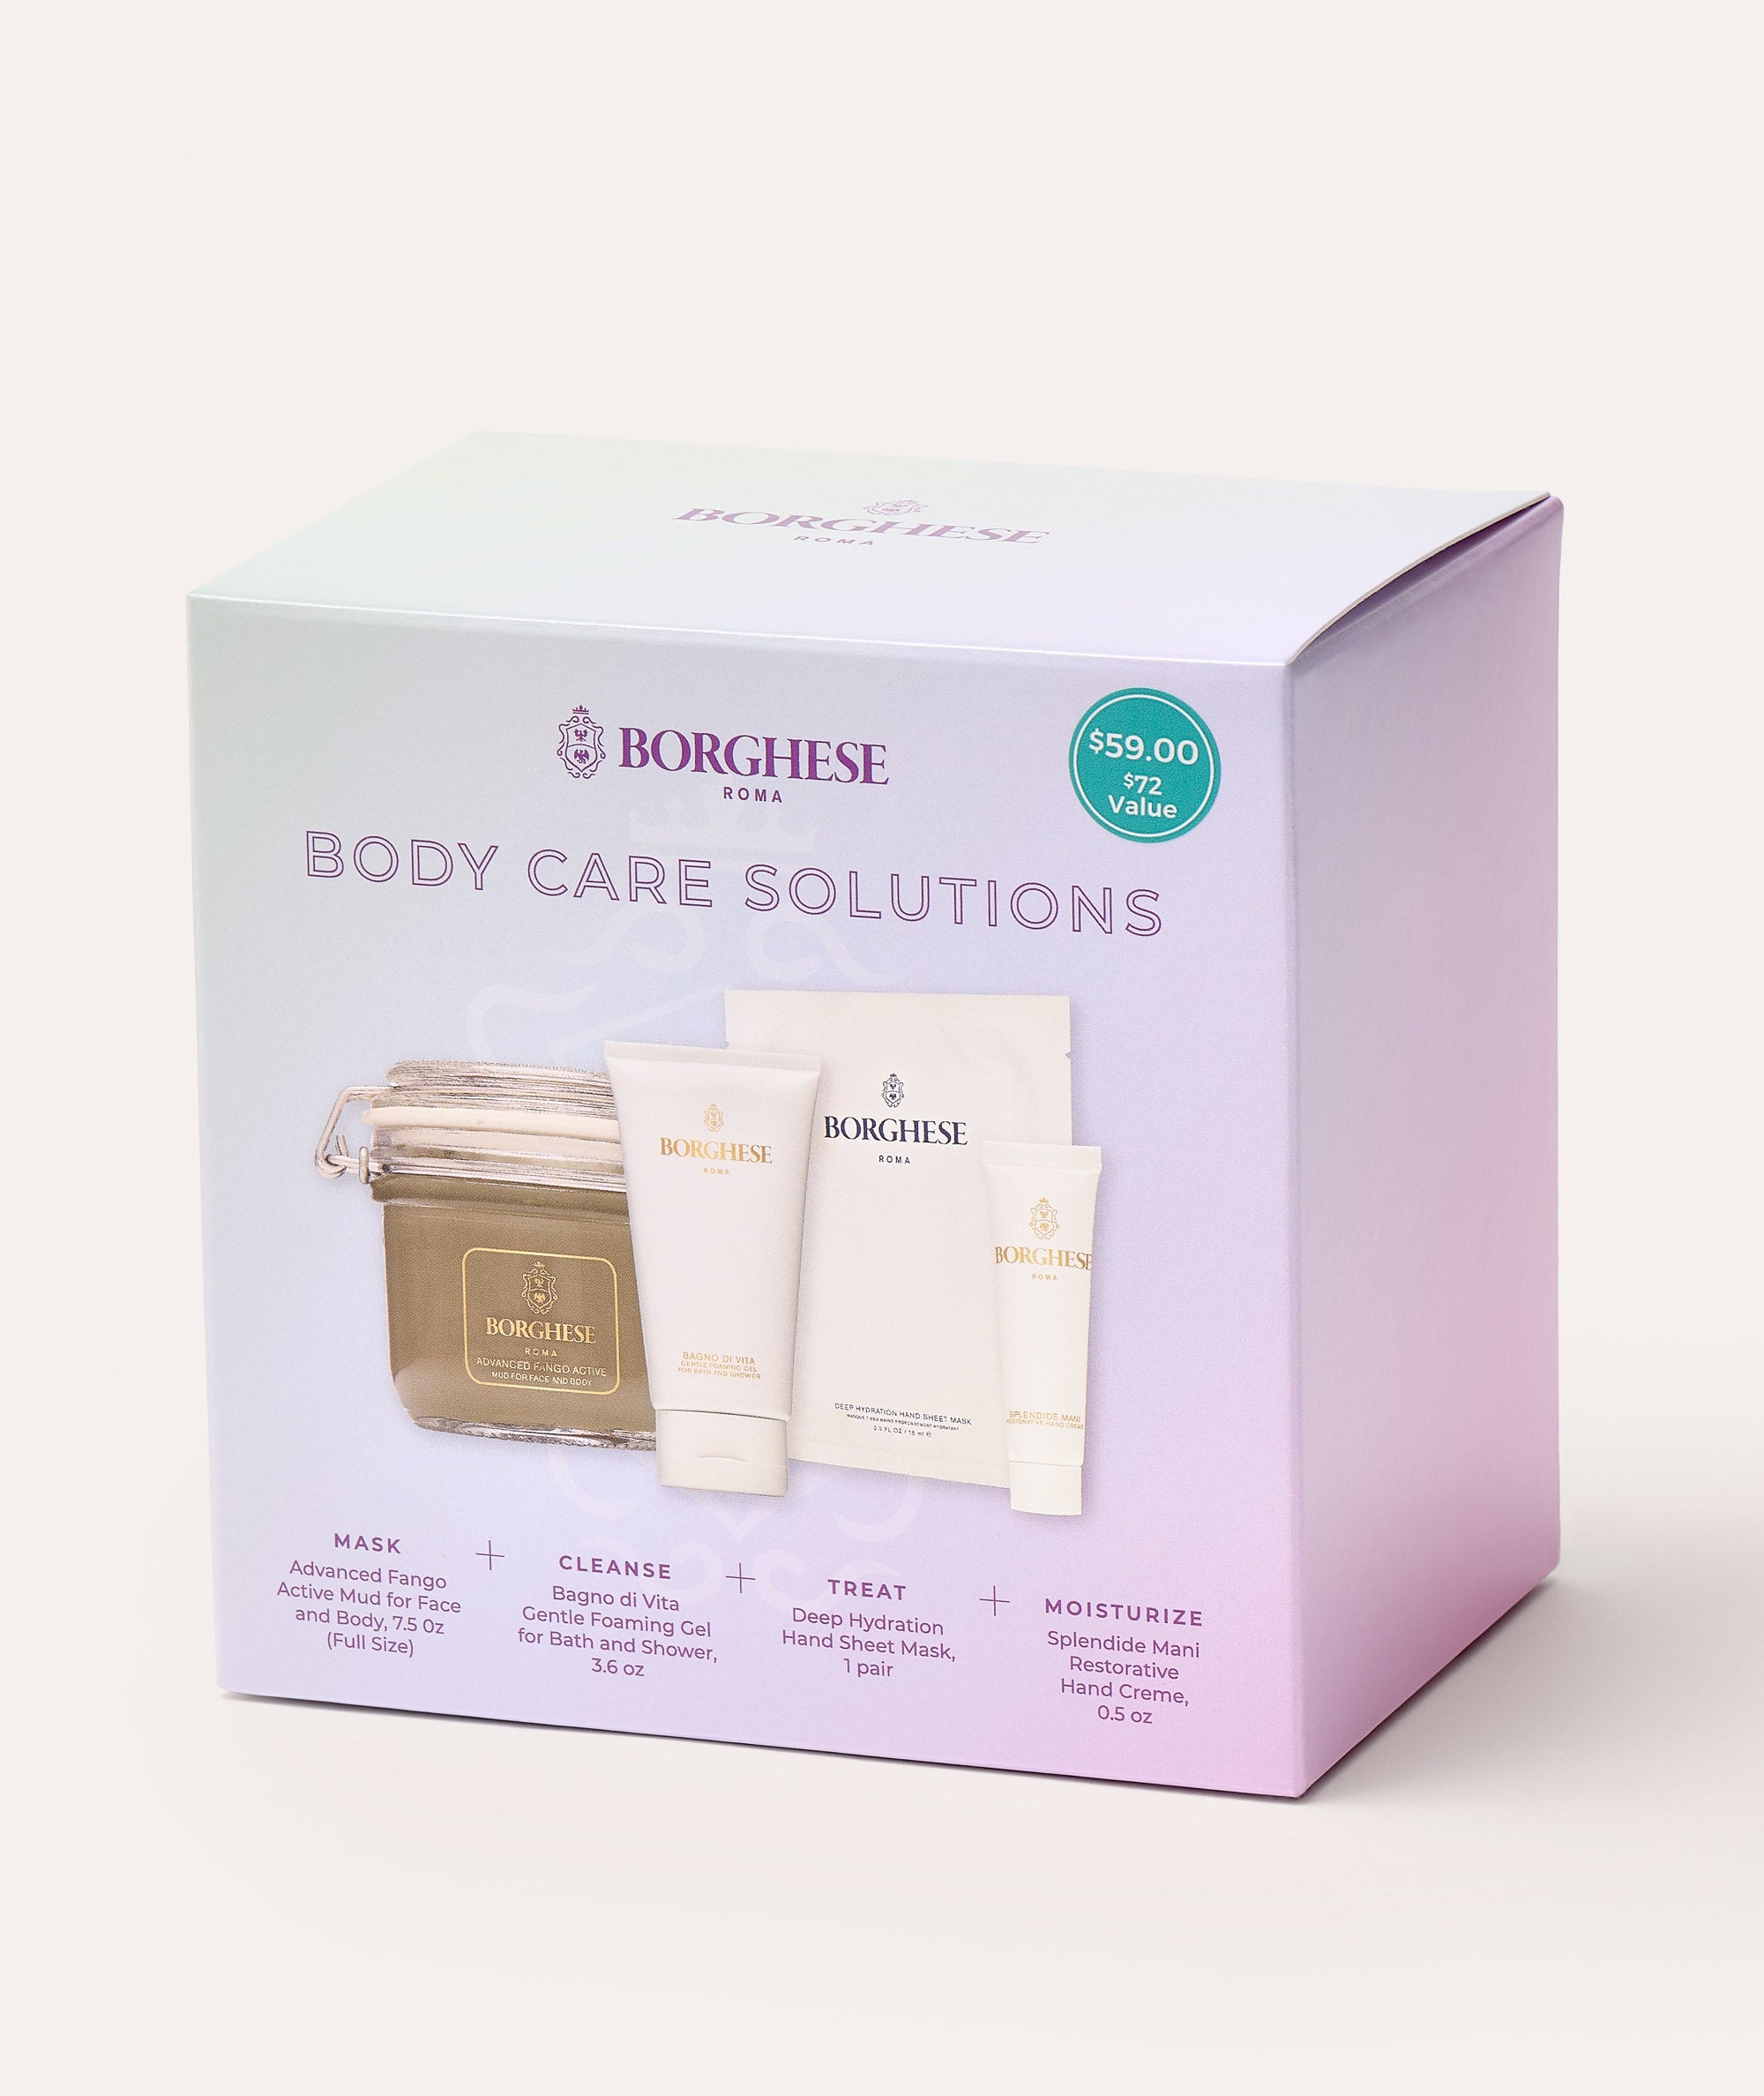 This is a picture of the Borghese 4 piece Body Care Solutions Gift Set box.